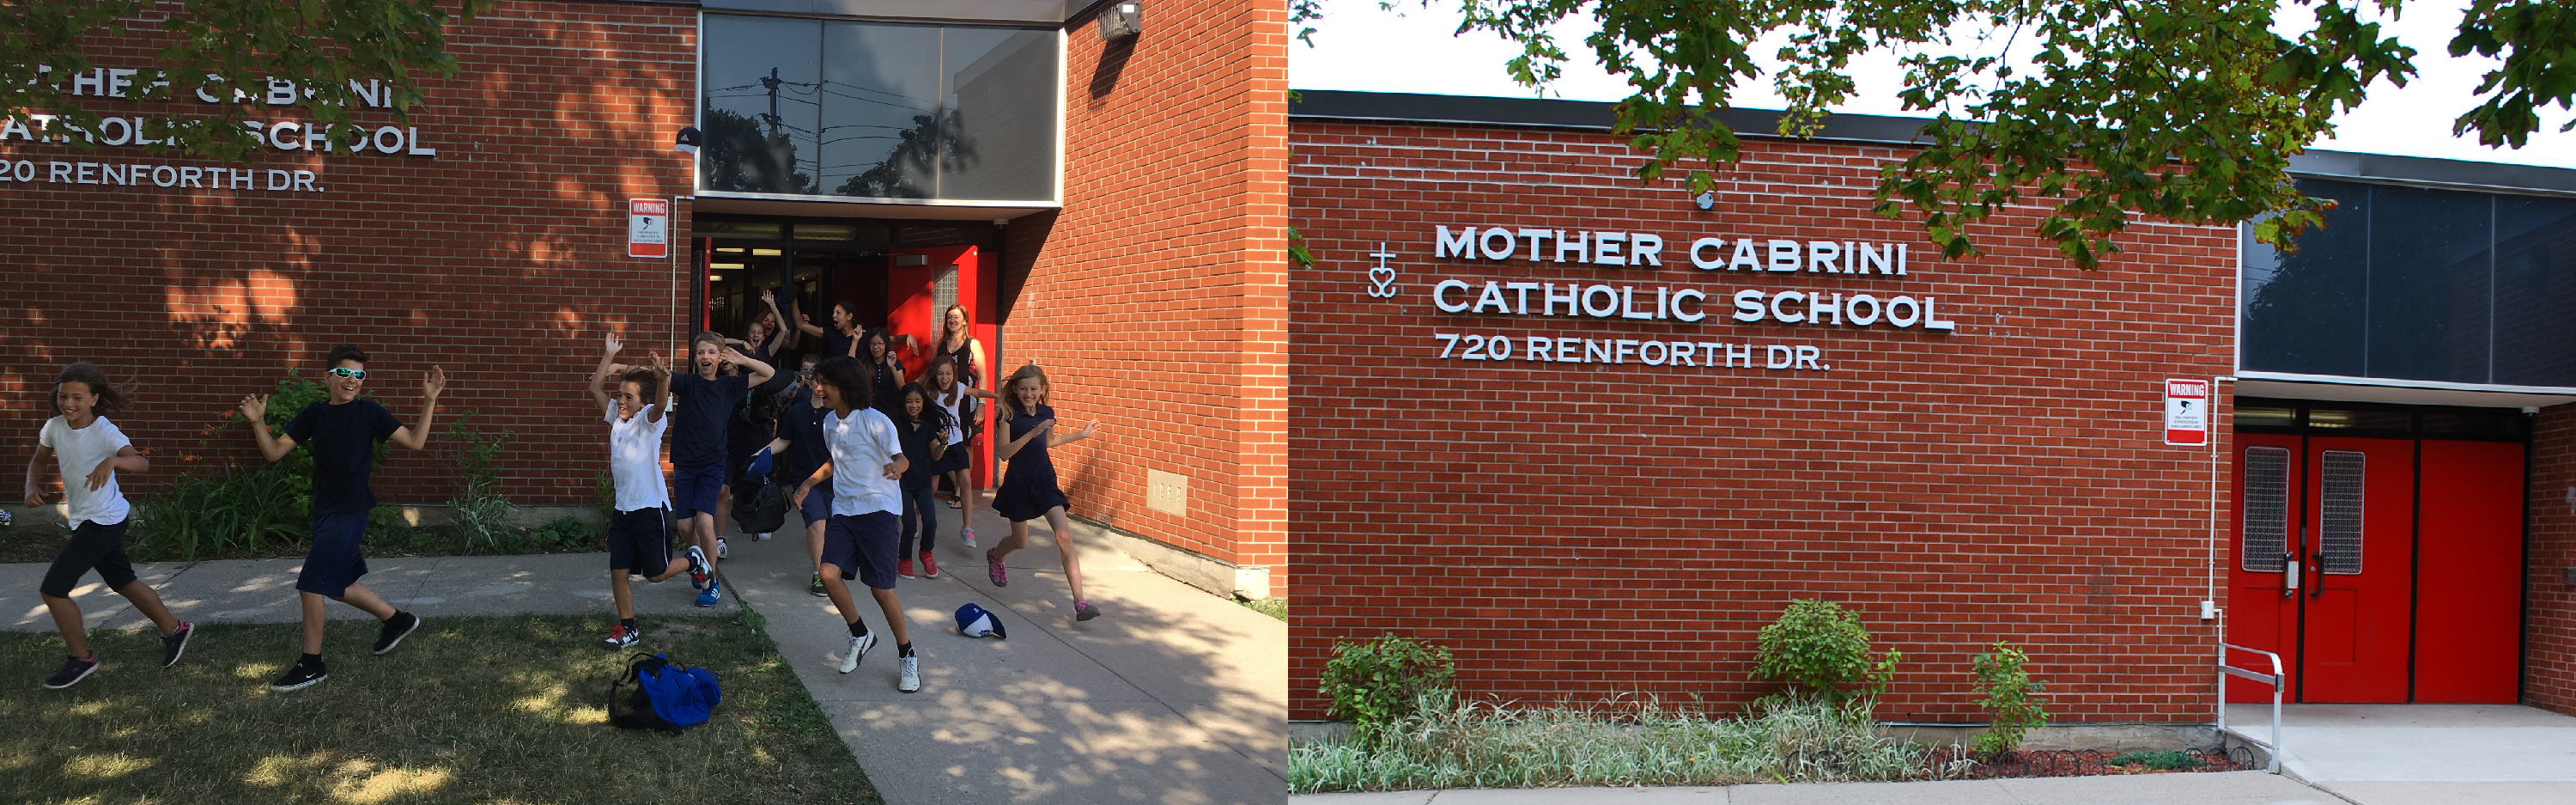 Left, students in uniform running out of the school front door. Right, the Mother Cabrini school building sign, with the school's 50th anniversary celebration banner hung under the sign.